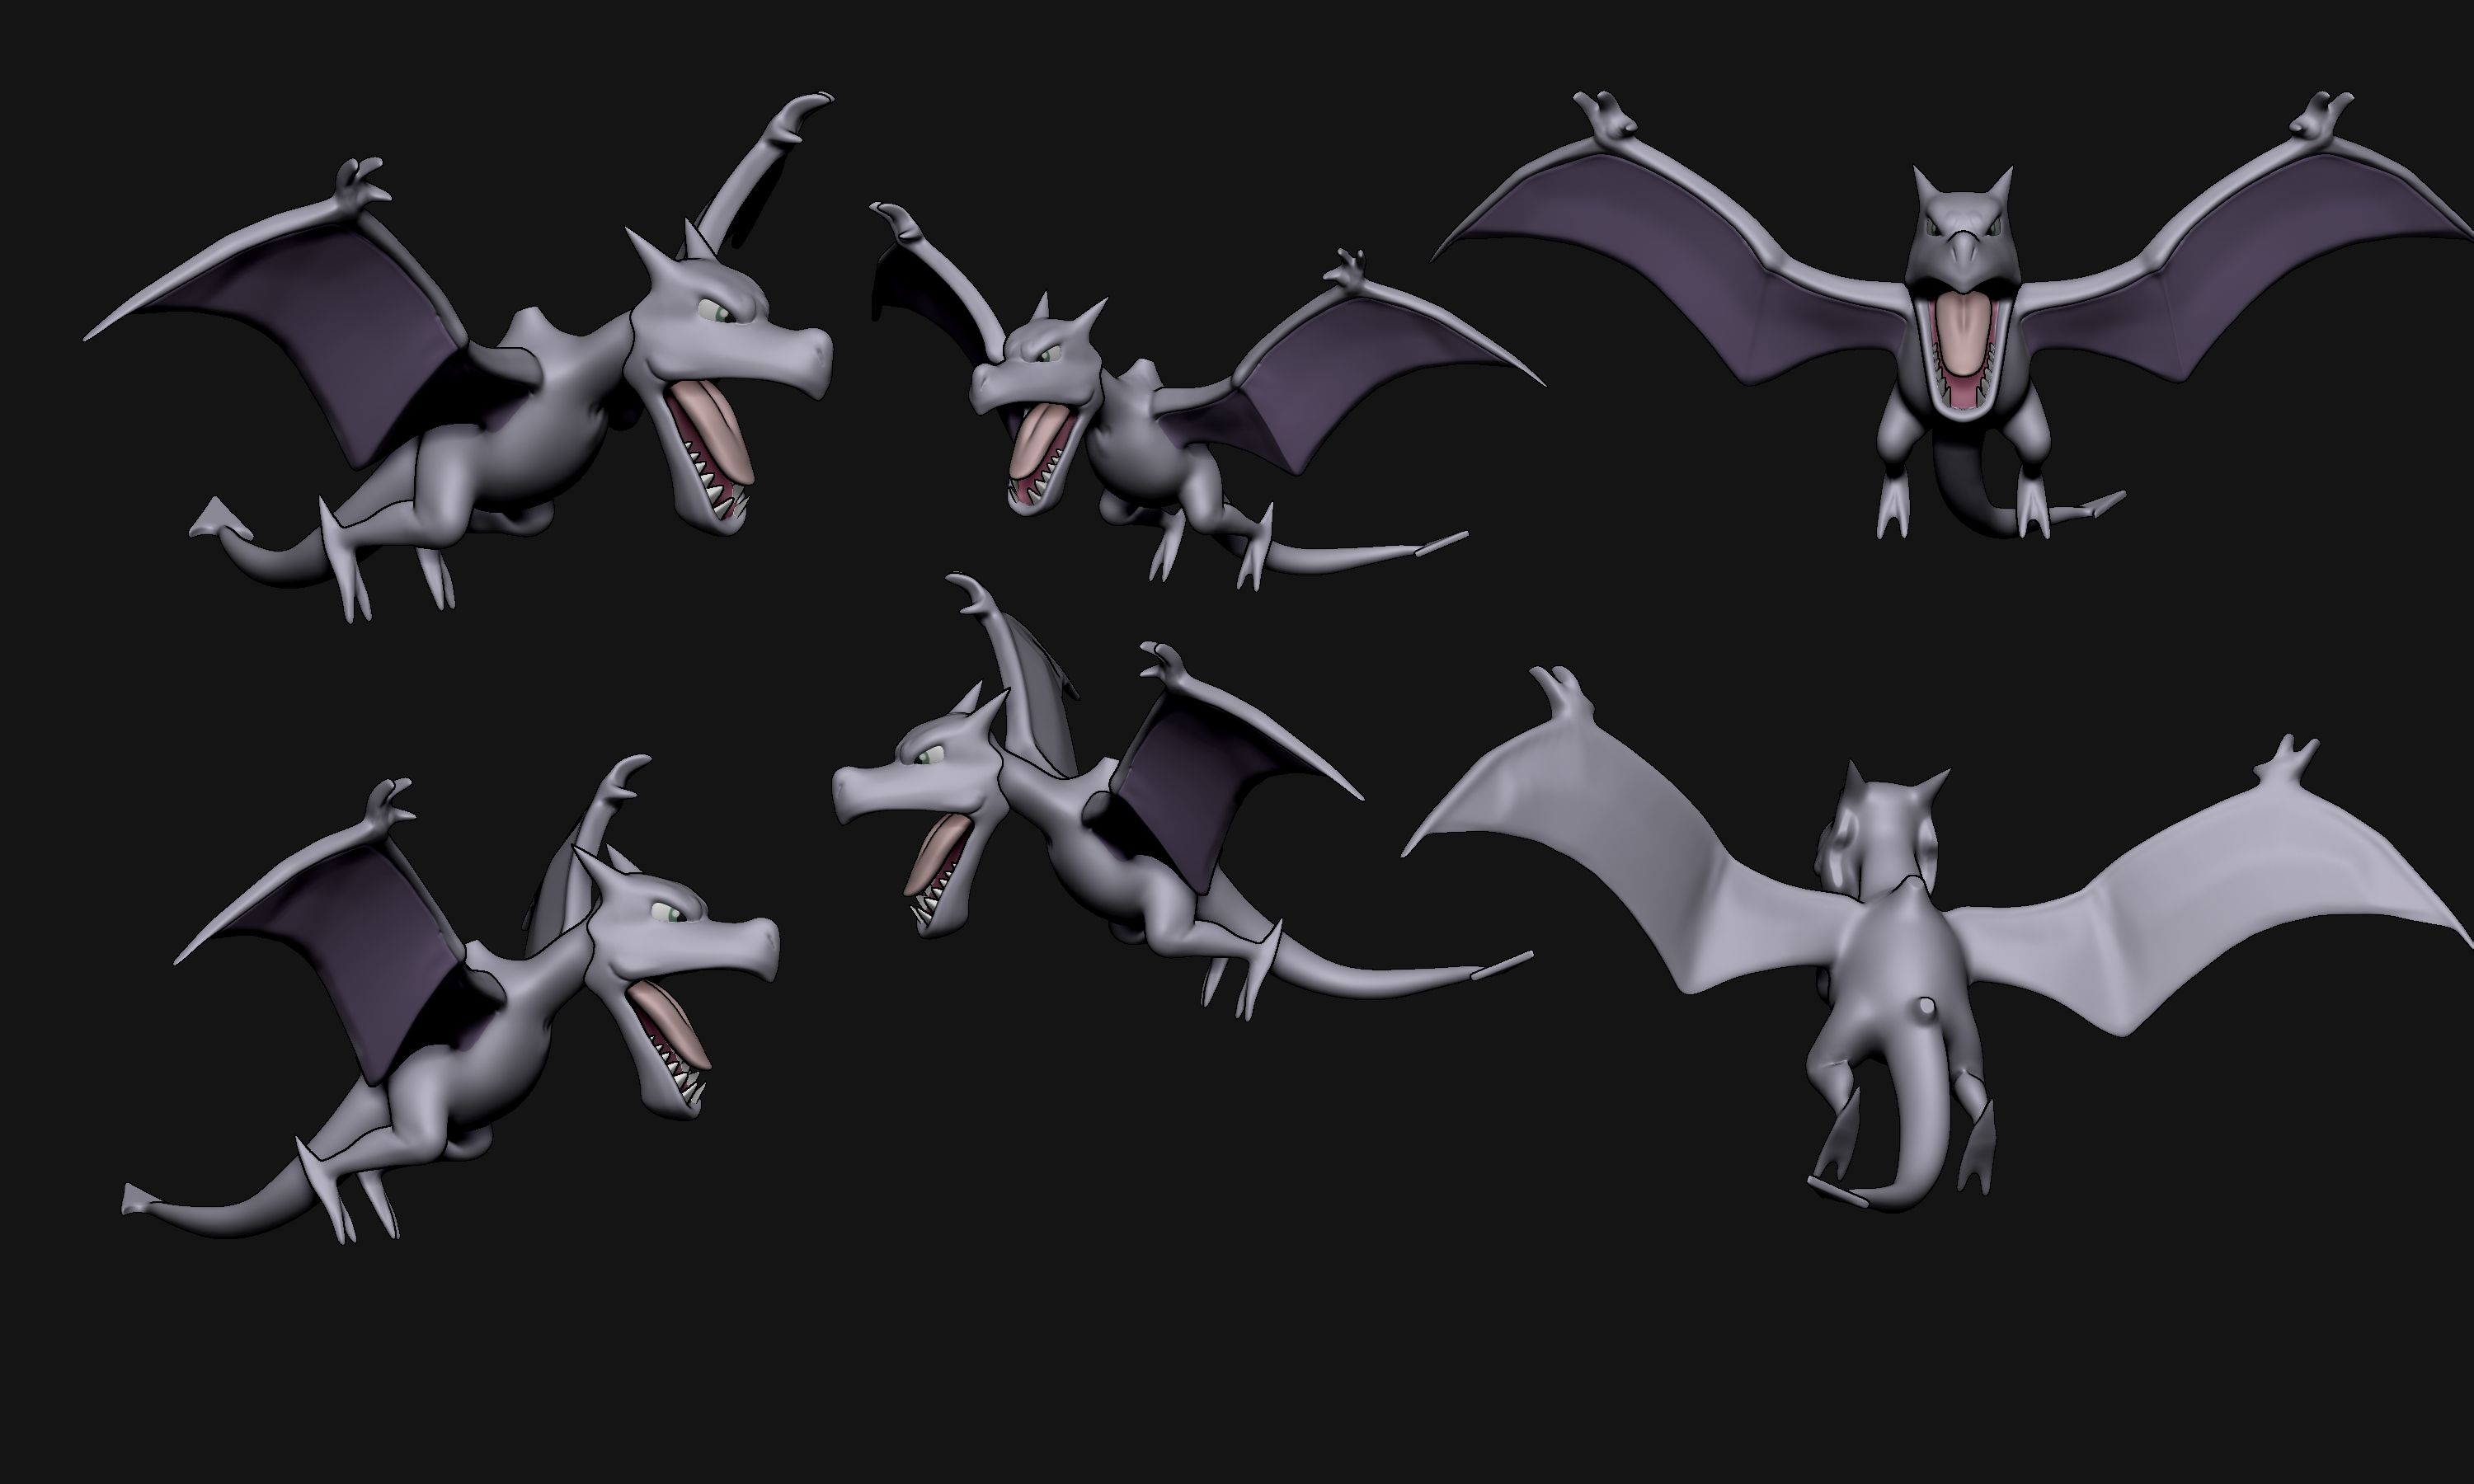 aerodactyl-cliente.jpg Download OBJ file Aerodactyl(with cuts and as a whole) • 3D printer template, erickantunesxd123